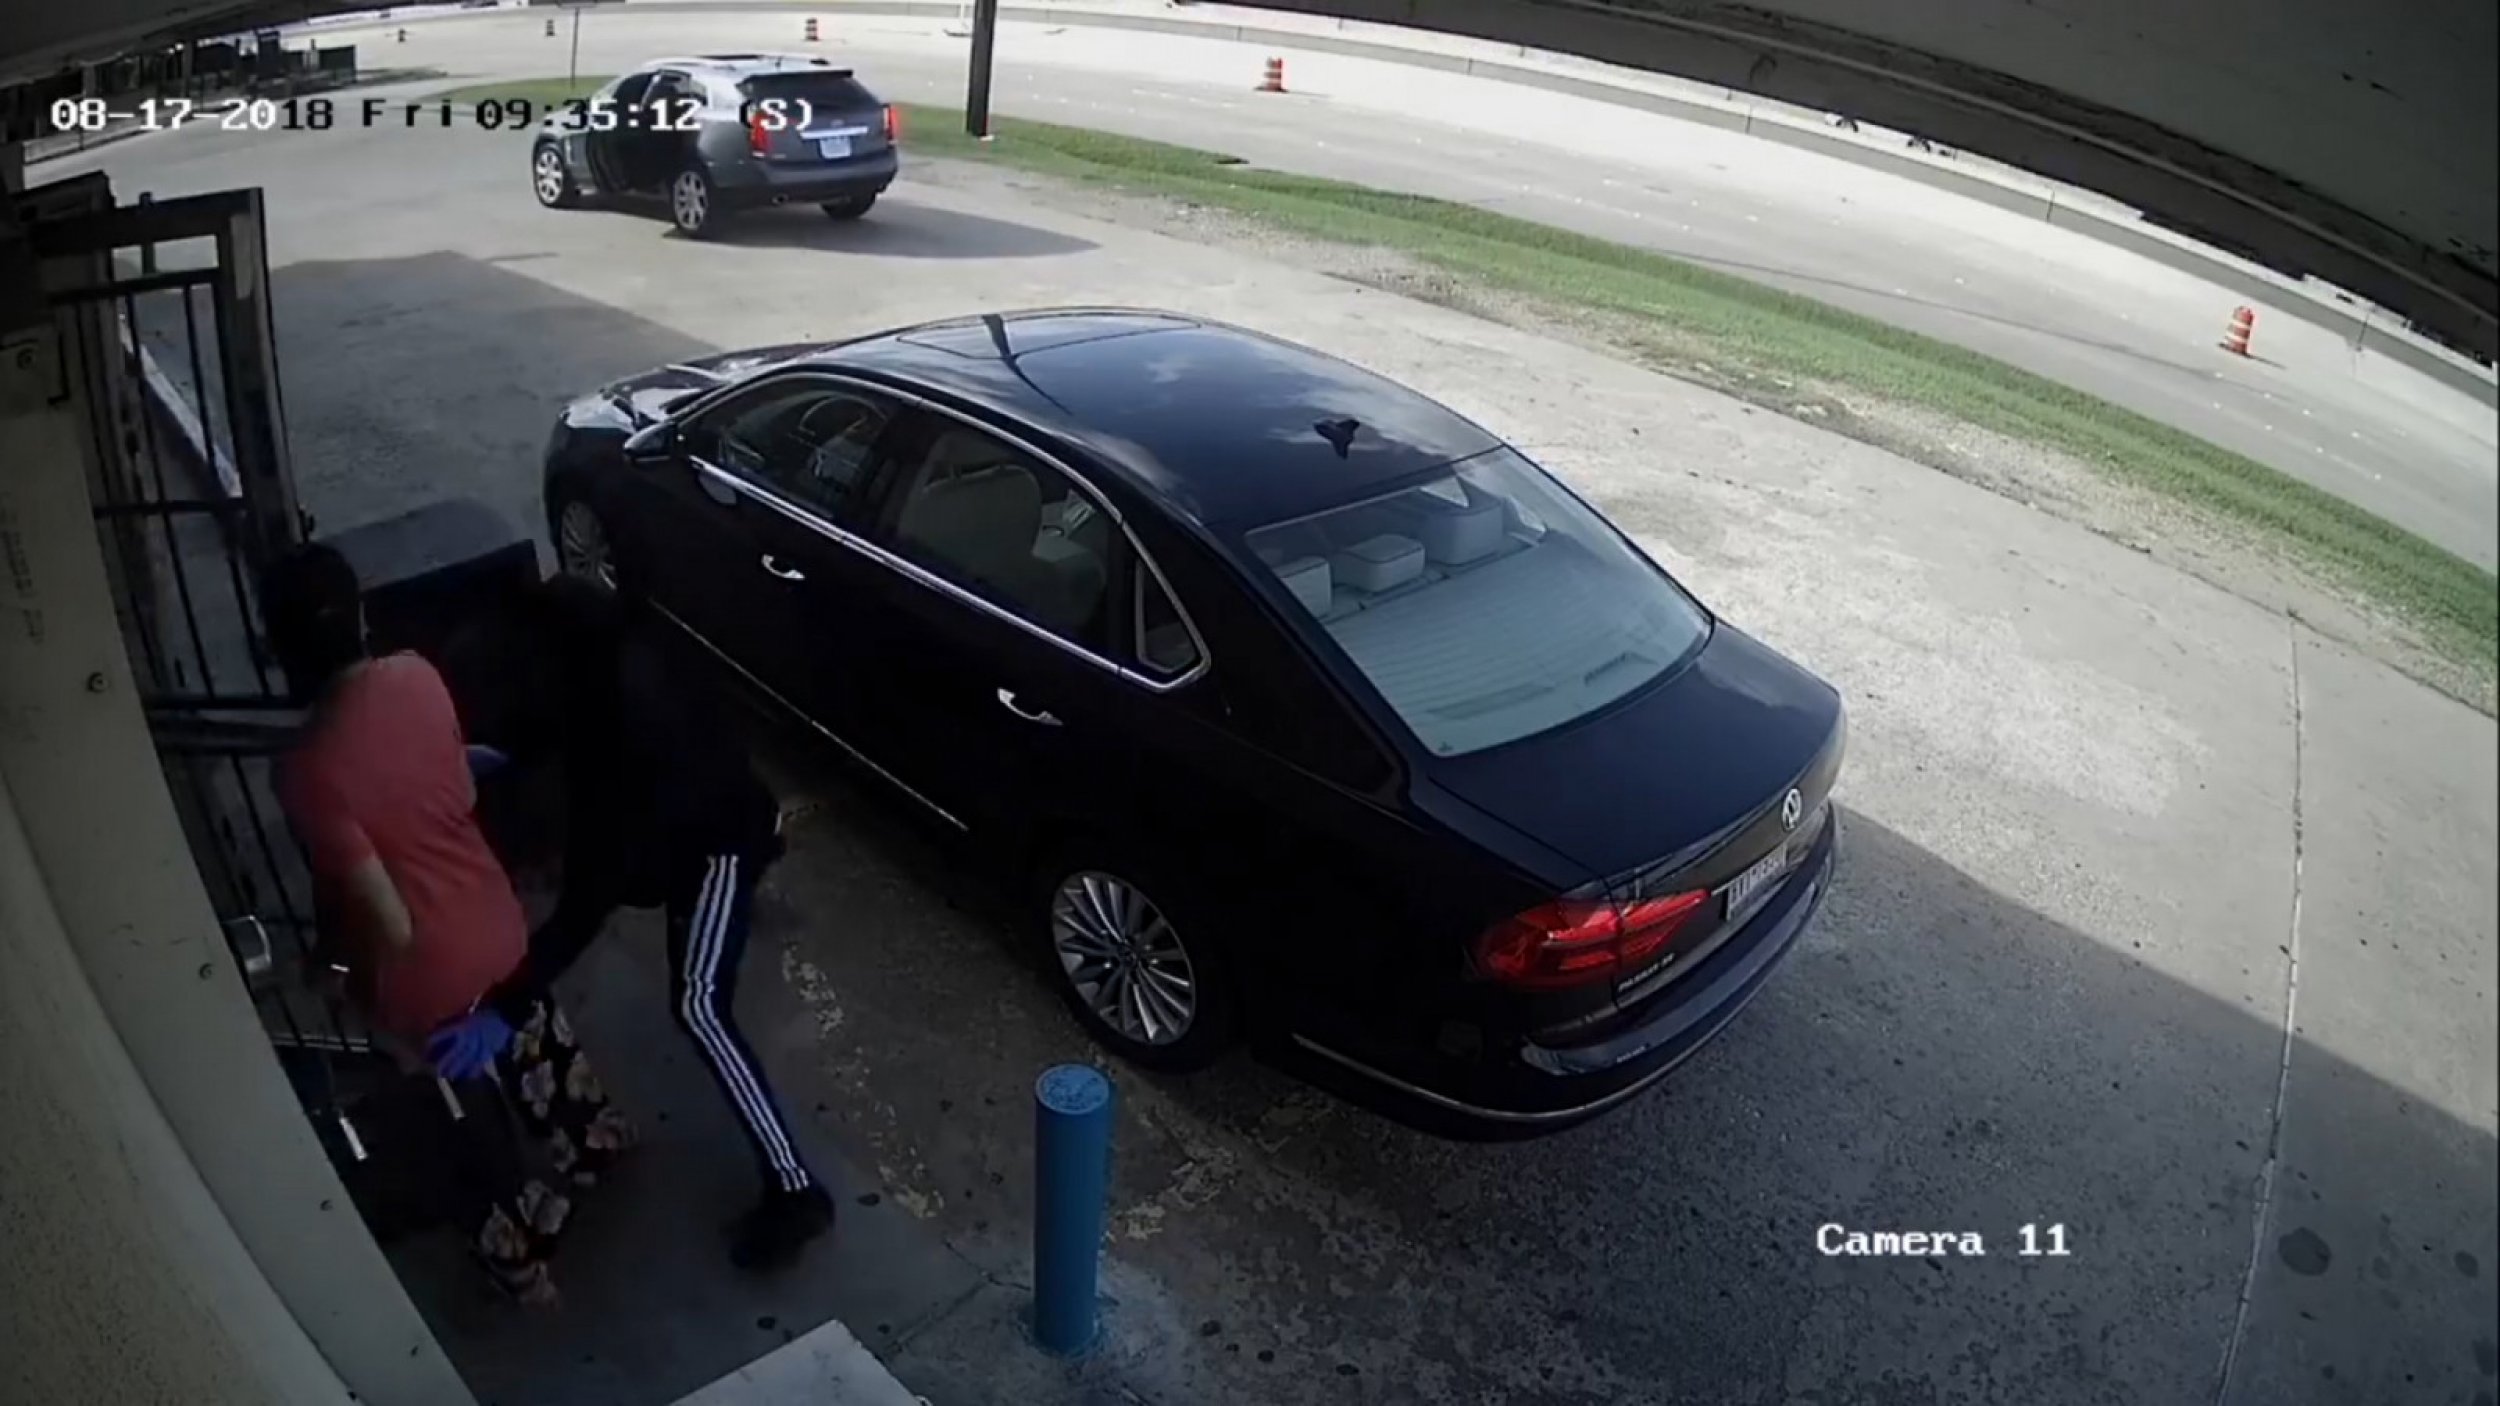 Woman With 75,000 In Her Purse Is Brutally Mugged And Run Over By Attackers